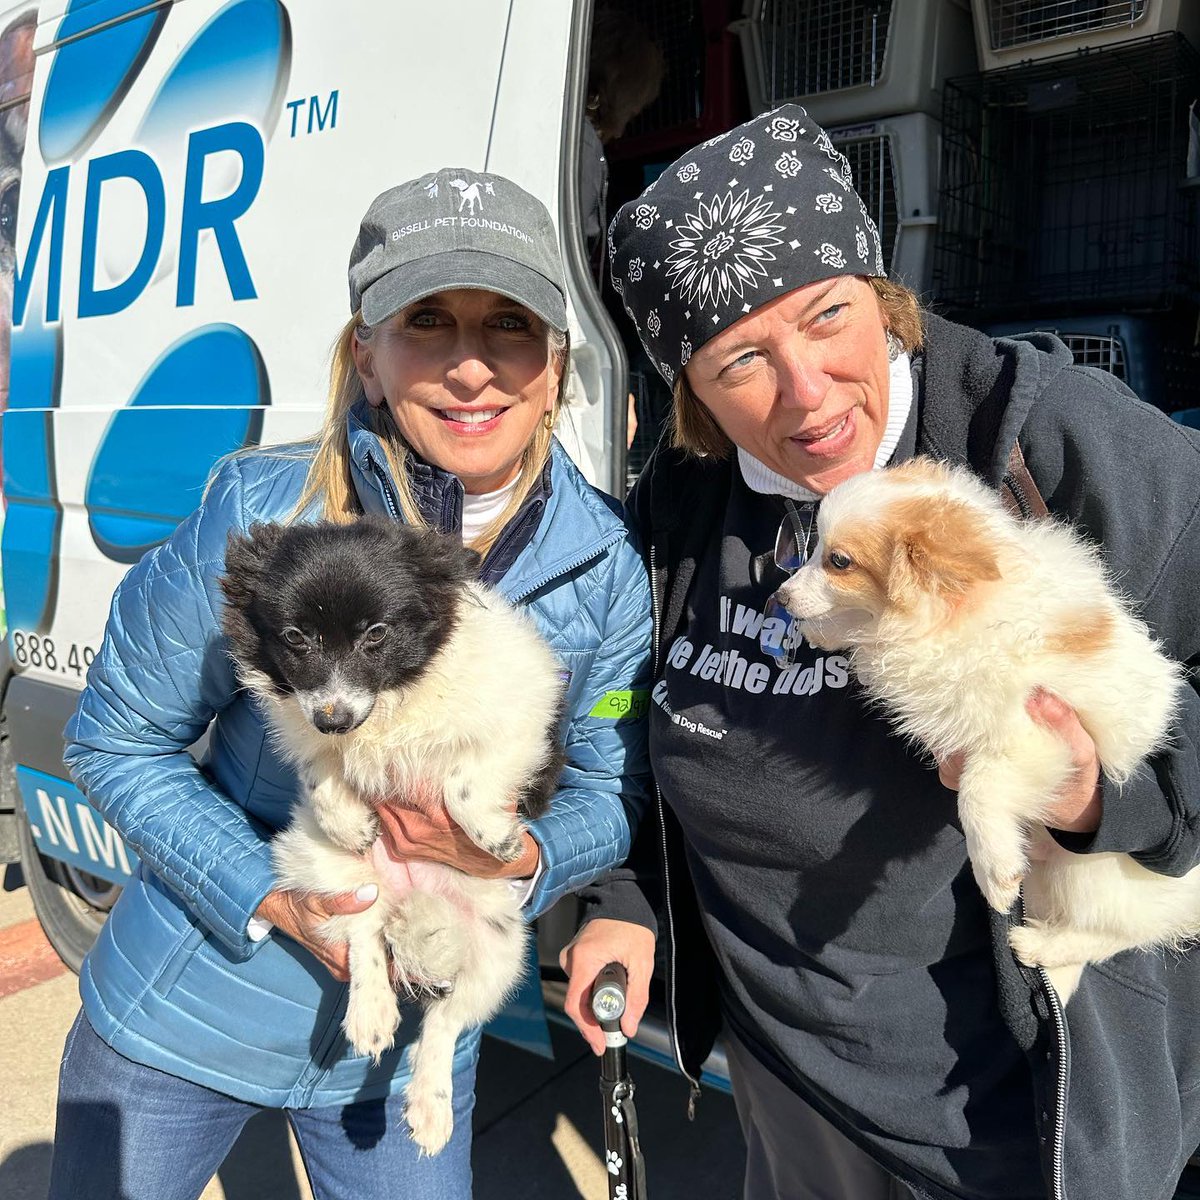 Check it out! These beautiful babies were loaded up today and moved to shelters in the Northeast. Thank you to Cathy Bissell and @BISSELLPets team, so proud and grateful!! #RescueDogs #DoingTheRightThing #AdoptDontShop For adoption info, go to nmdr.org 🐶